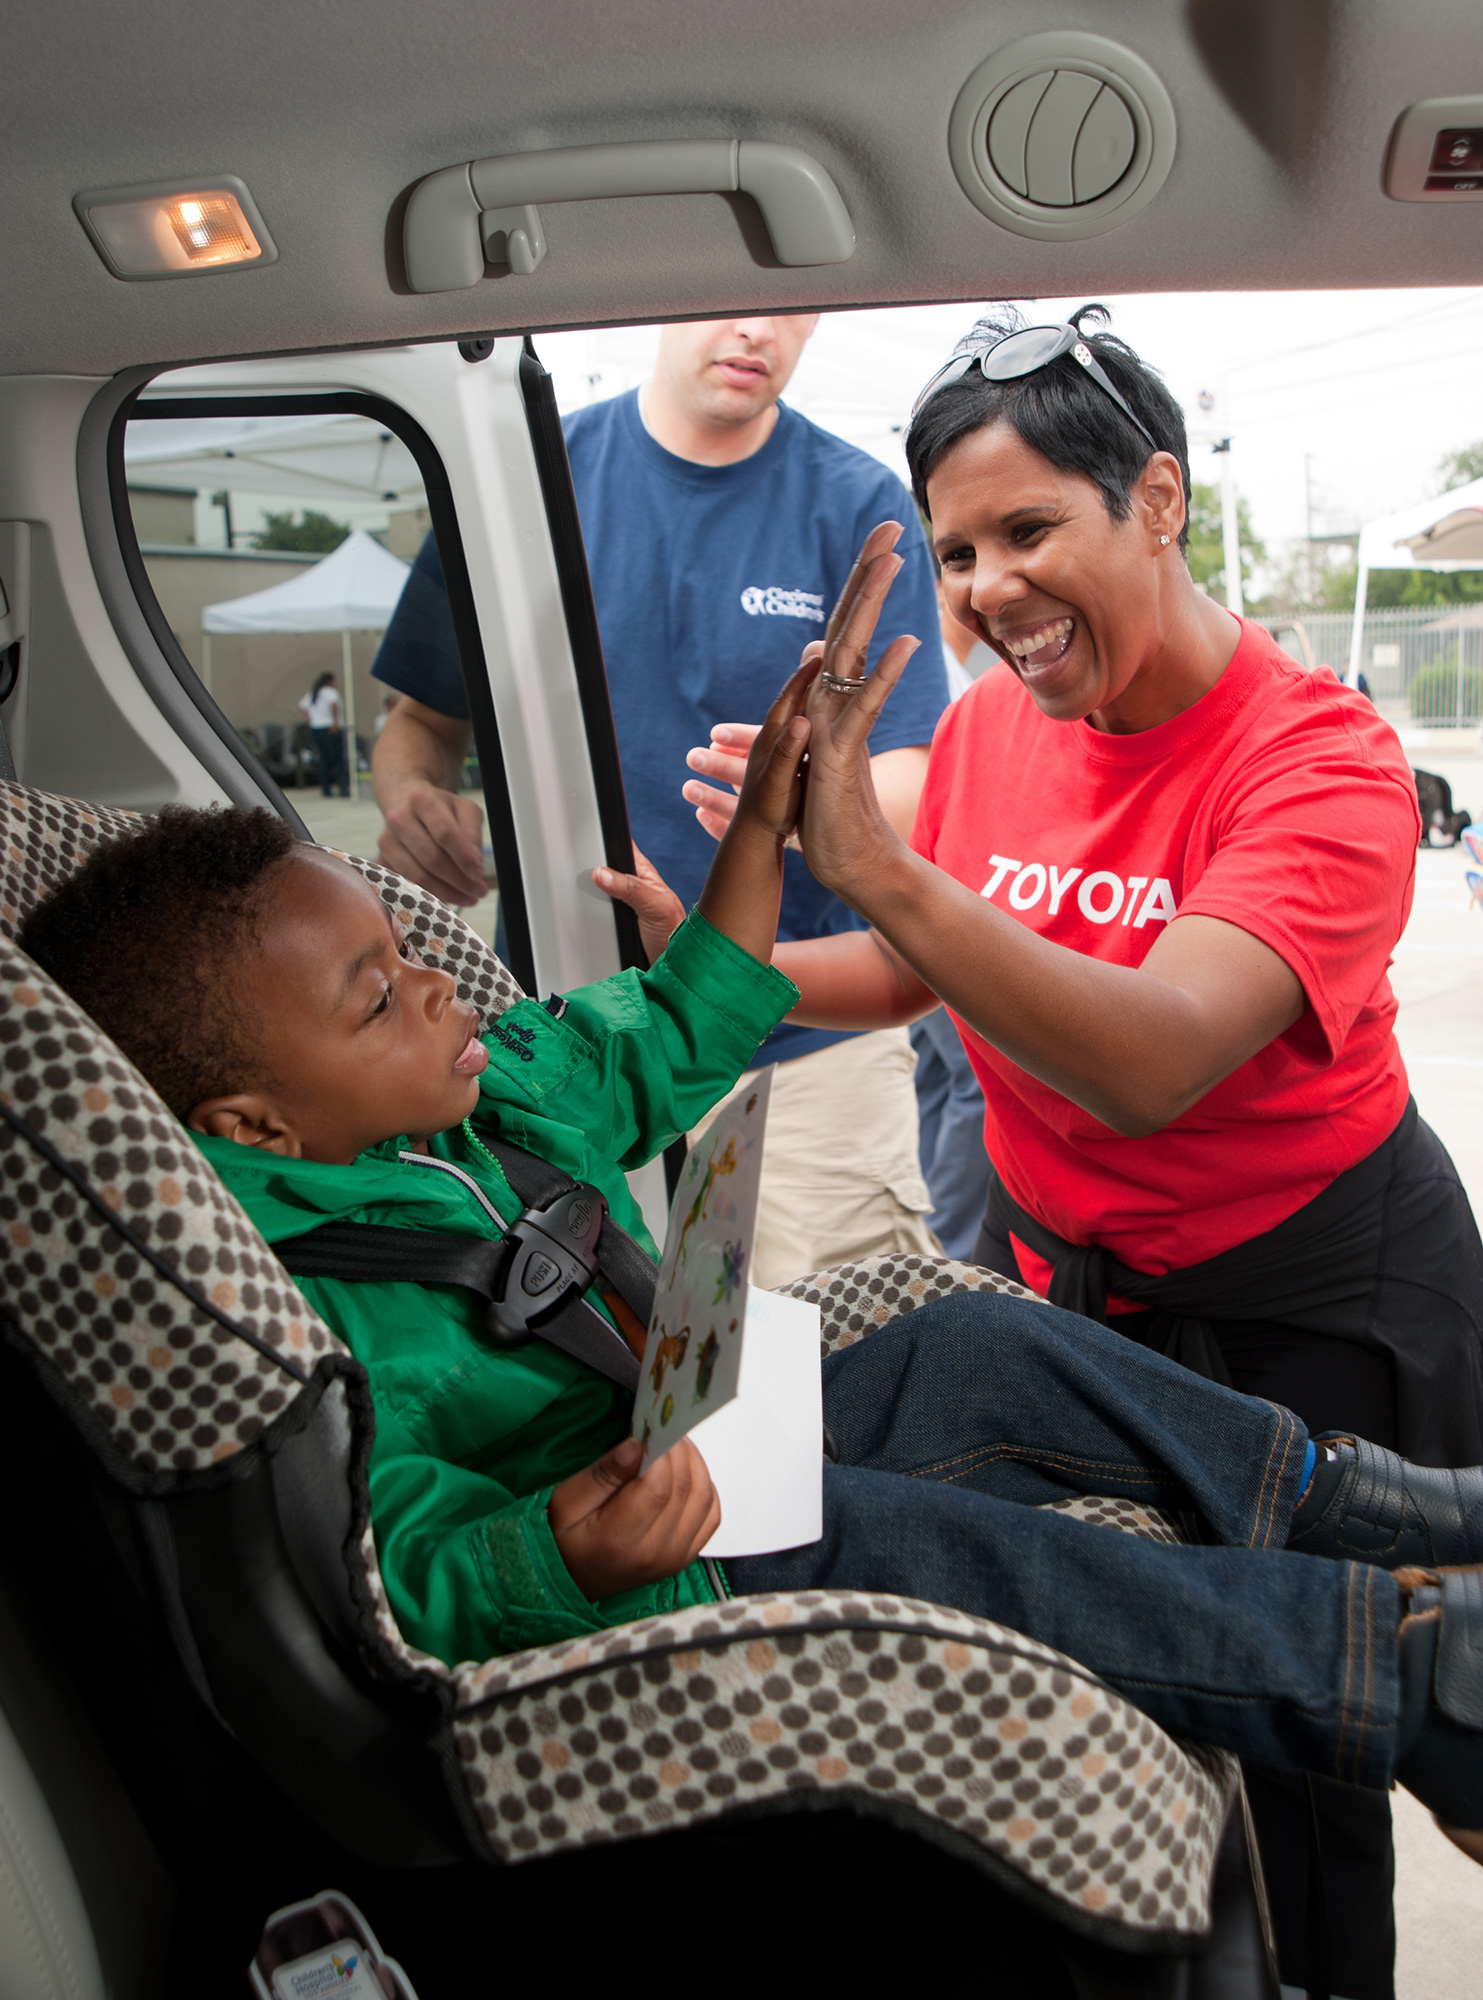 Buckle Up for Life: Toyota and Cincinnati Children's Hospital Medical